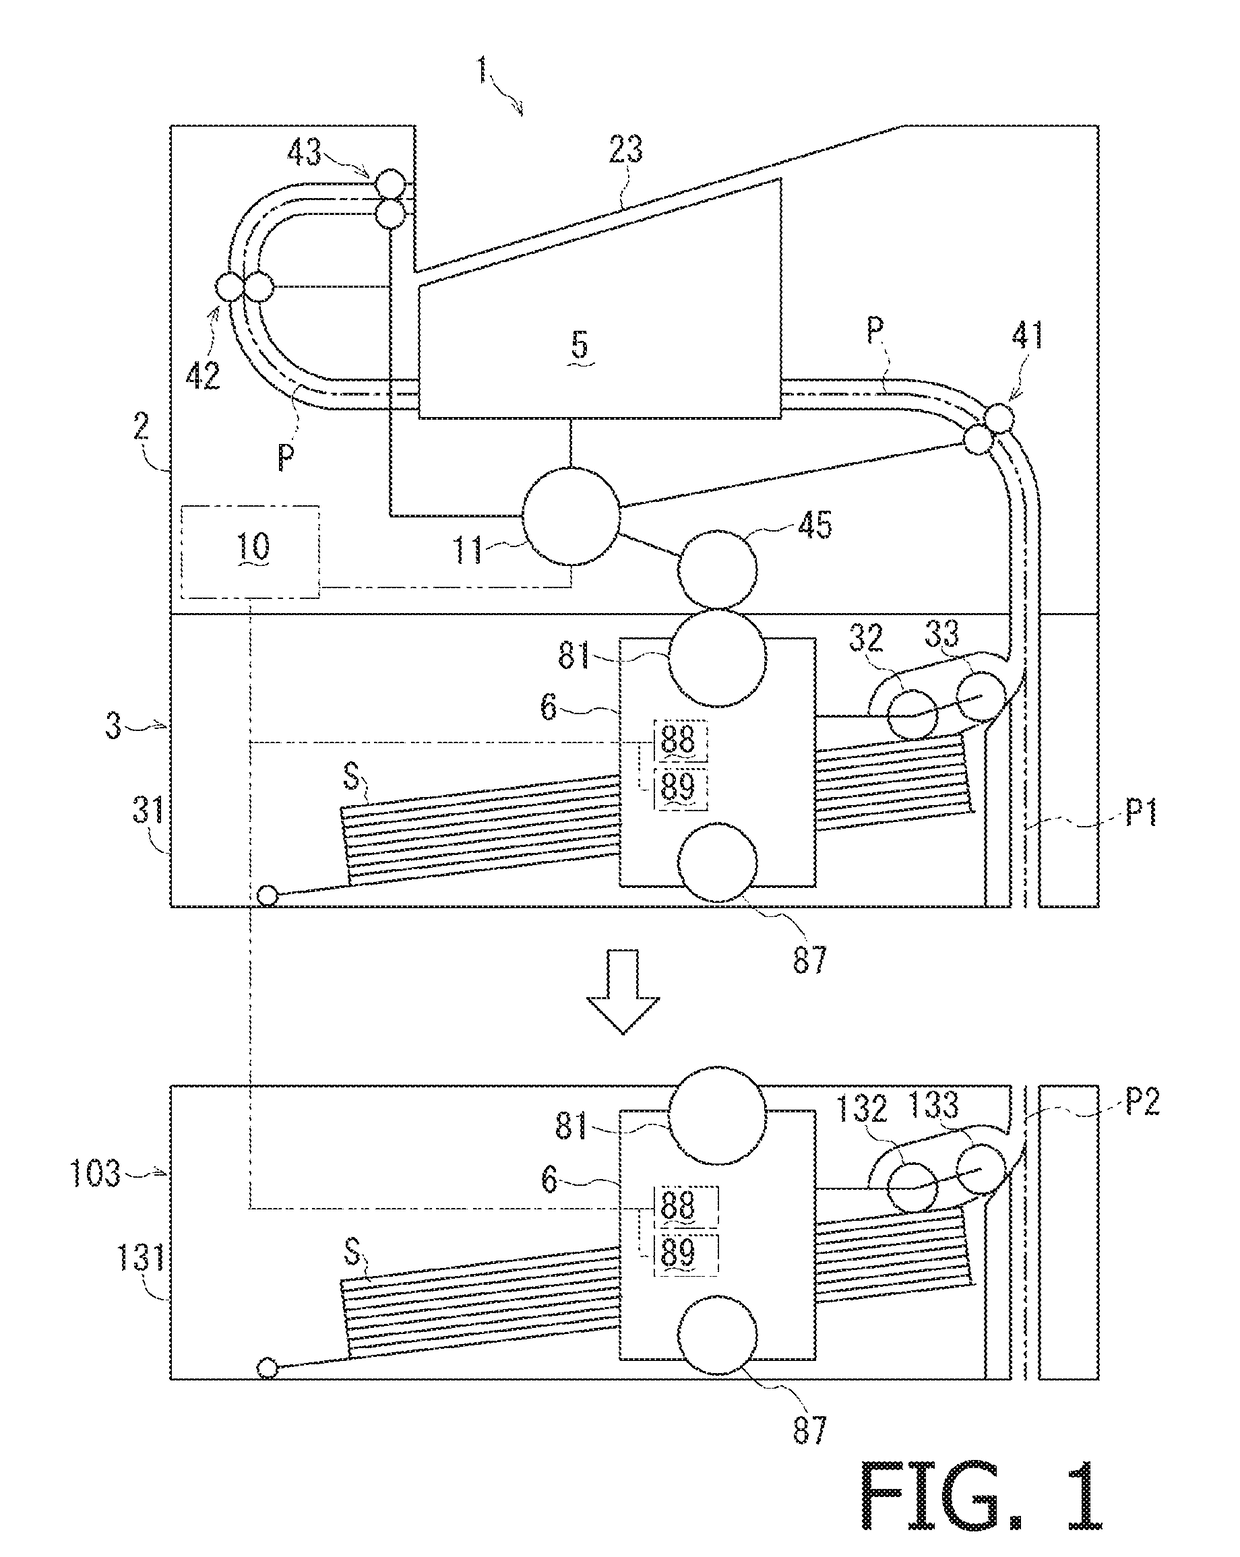 Driving Force Transmitter, Sheet Feeding Unit, and Image Forming Apparatus